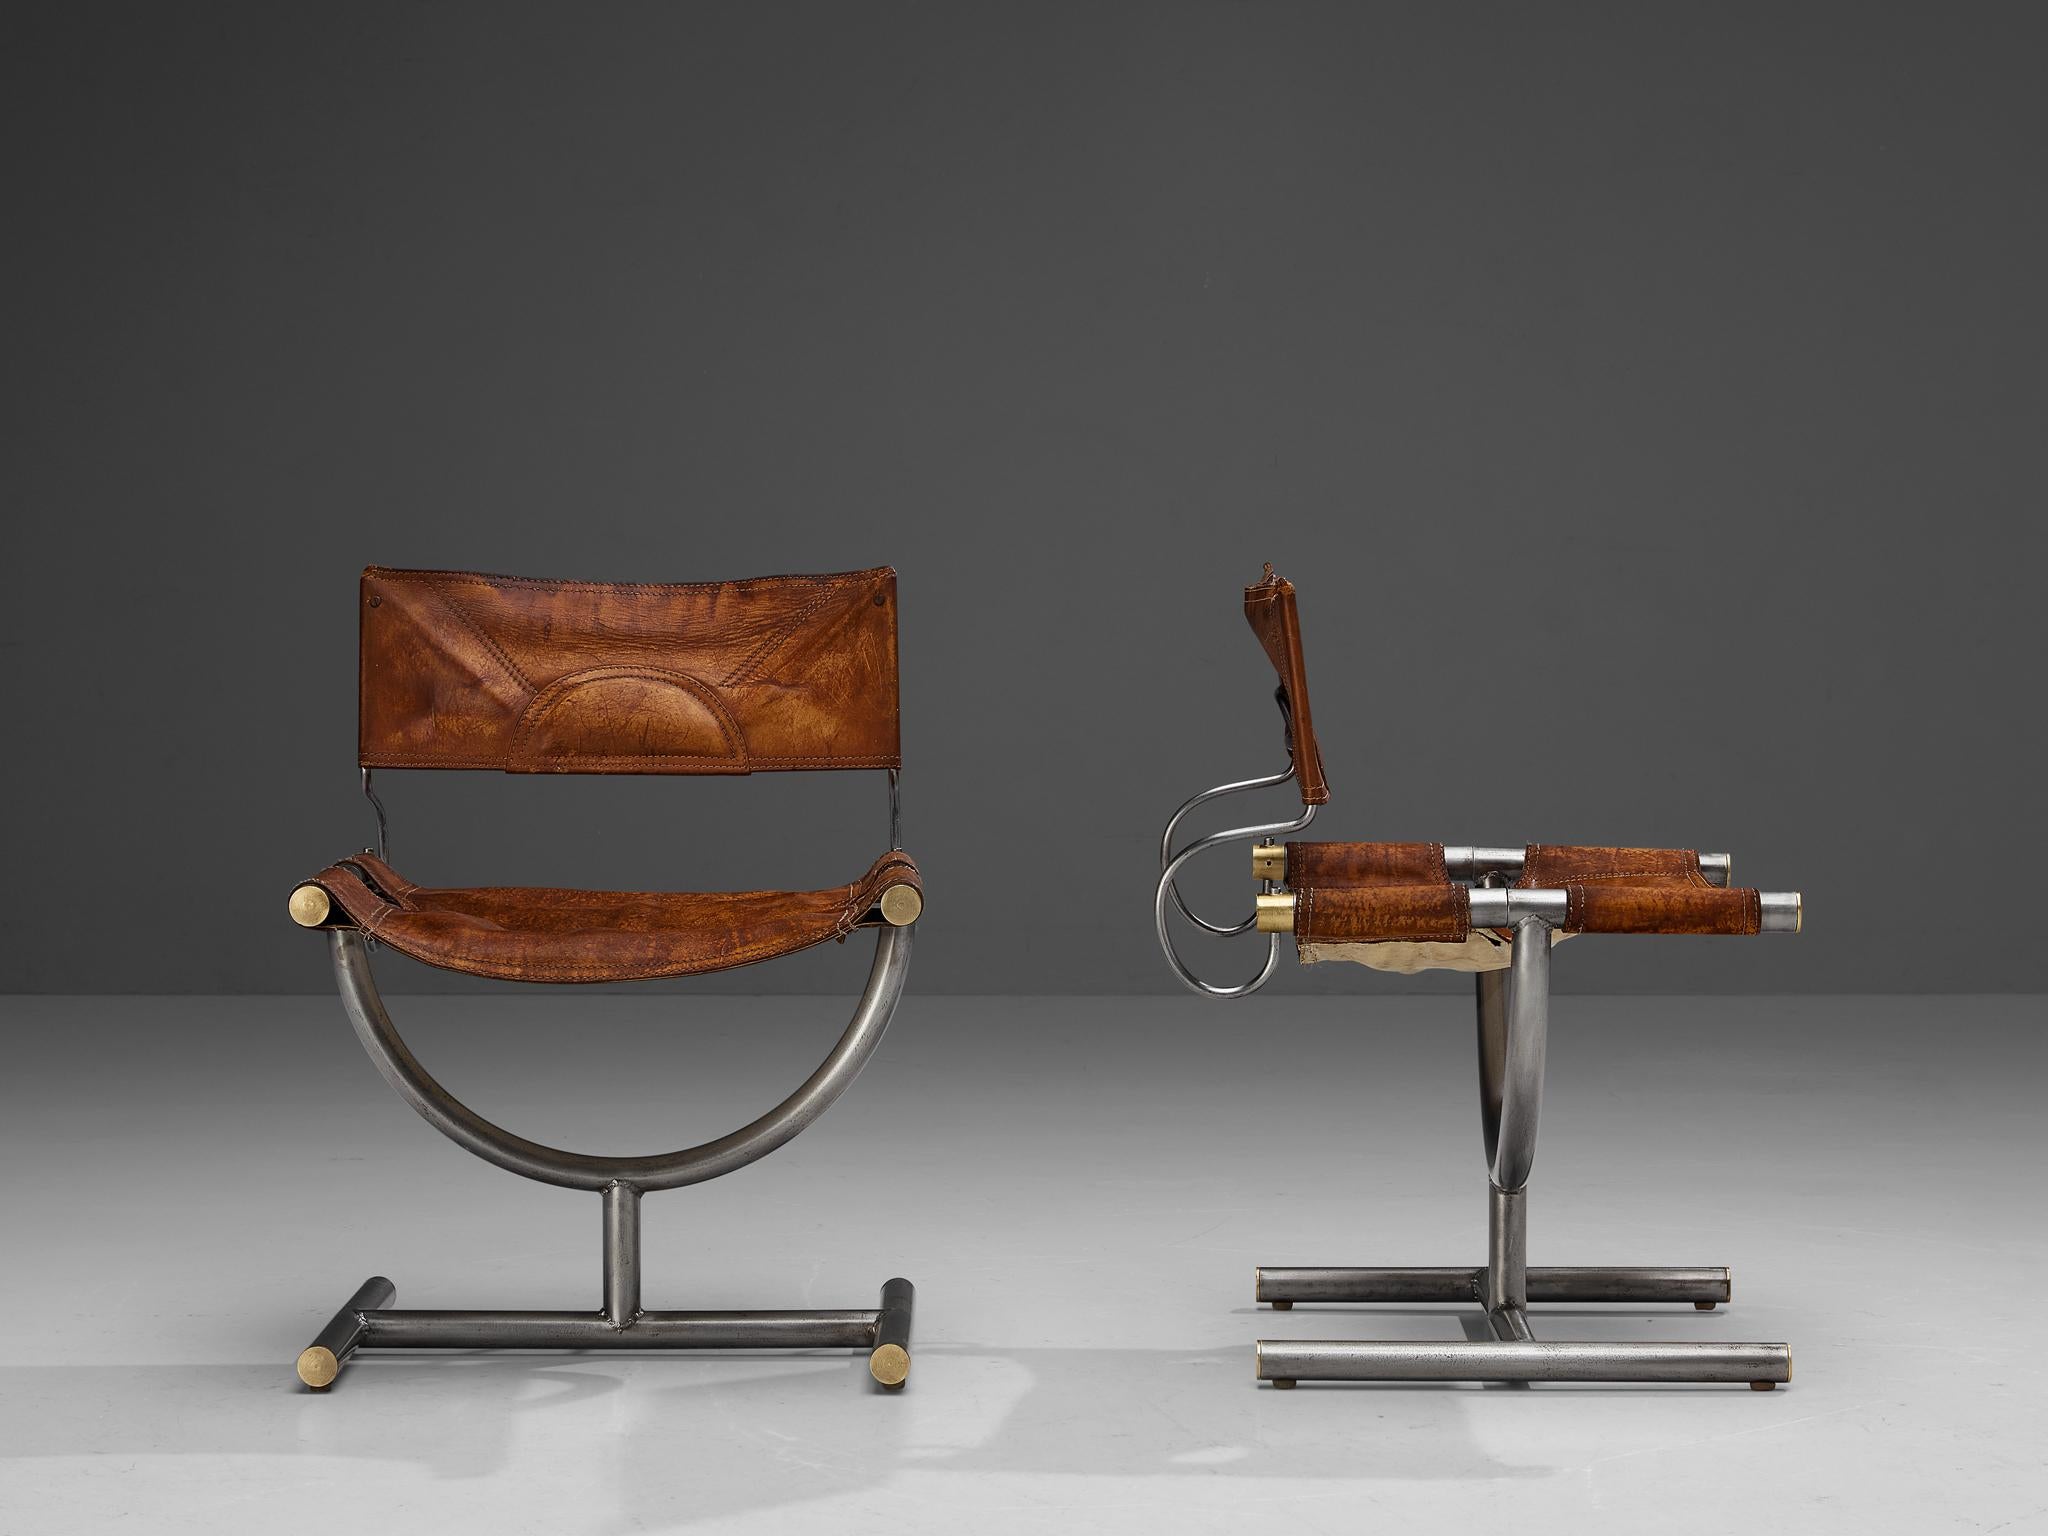 Afra & Tobia Scarpa for Benetton Office, chairs, brass, leather, steel, Italy, 1985 

This pair of chairs is designed for the office of the clothing brand Benetton by Afra & Tobia Scarpa. These chairs are executed in original cognac leather and